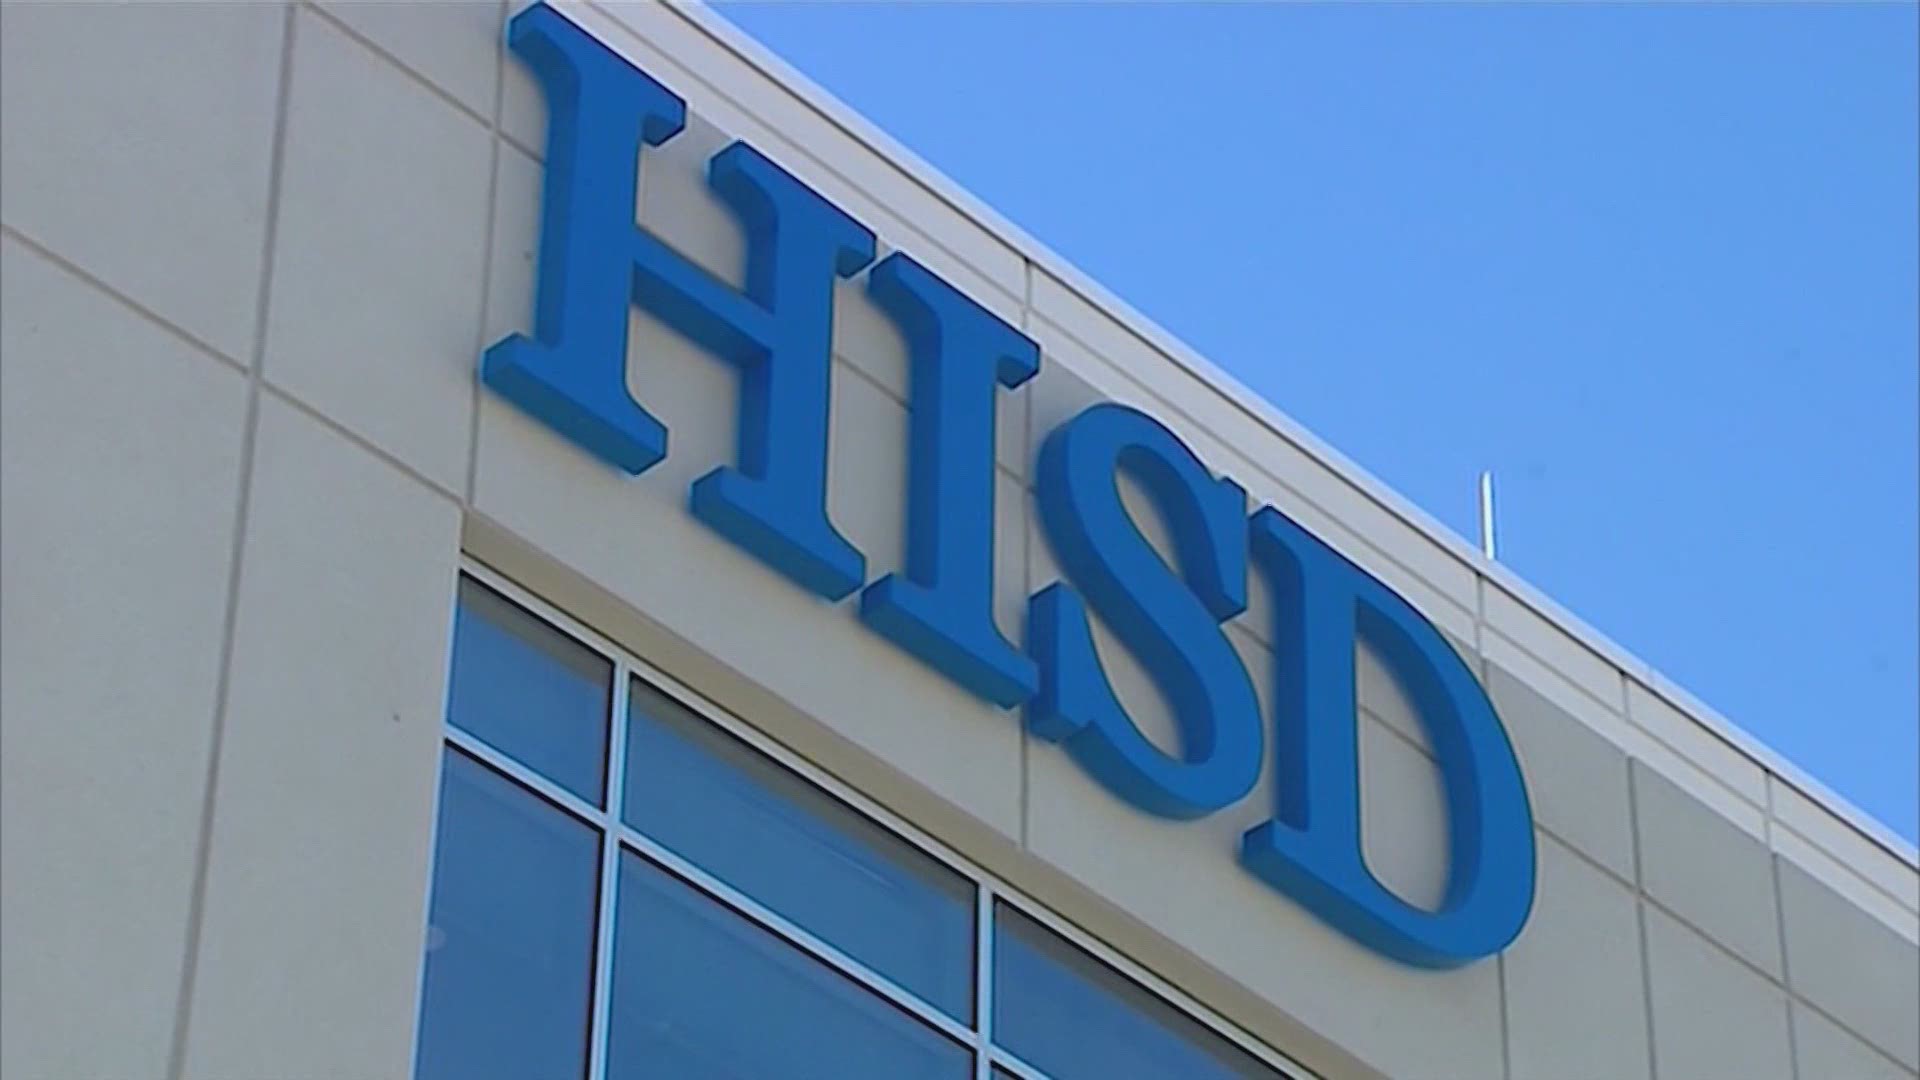 Critical race theory and mask mandates are driving participation in local school board elections. Four HISD incumbent trustees are currently locked in runoff battles